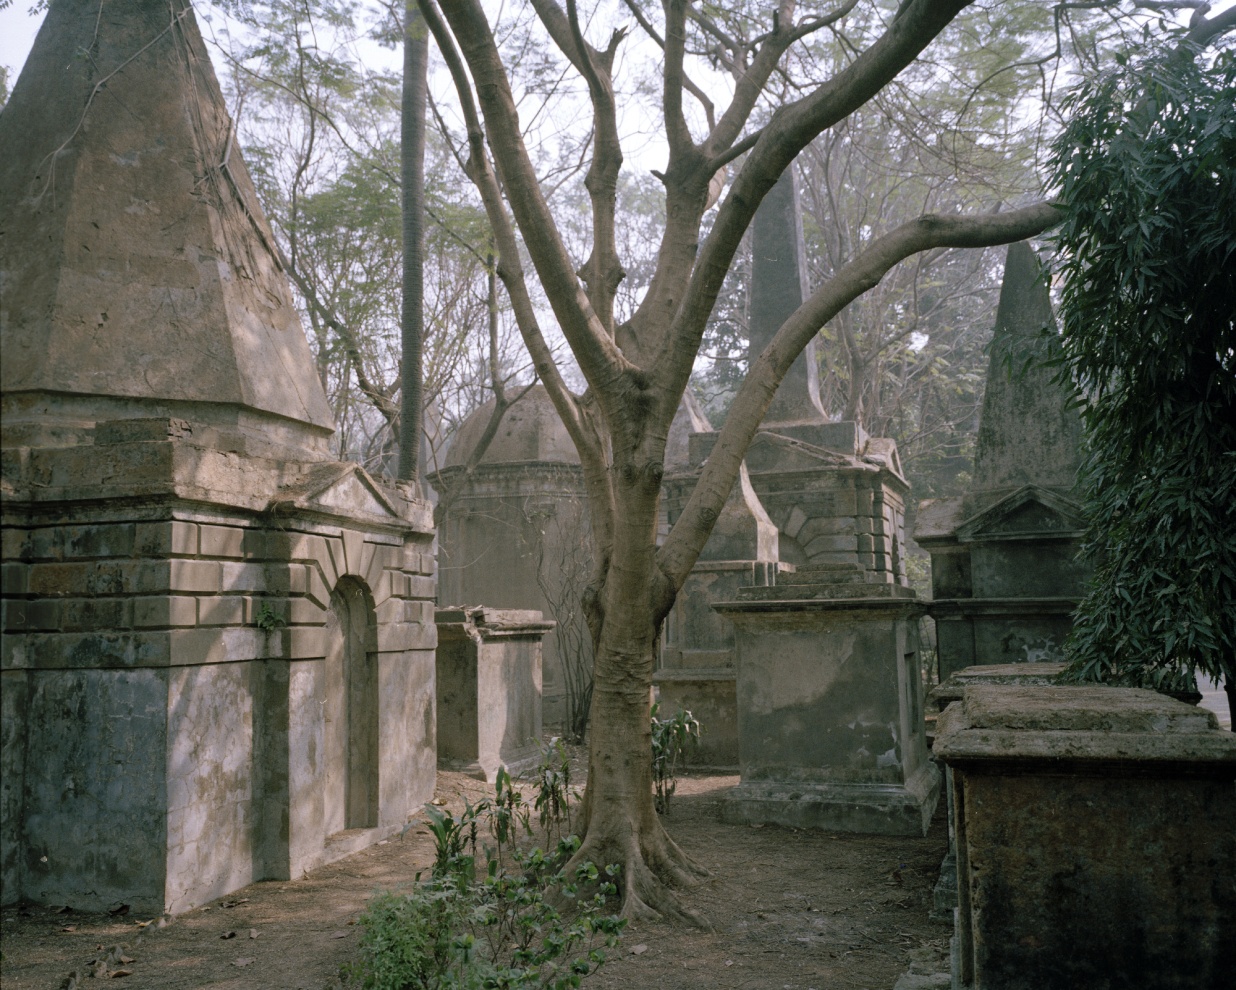 Kolkata/ Calcutta,2015. South Park Street Cemetery, formerly known as the ‘Great Christian Burial Ground’, was one of the earliest non-church cemeteries in the world. The cemetery houses numerous graves and monuments belonging to British soldiers, administrators, and their families. 